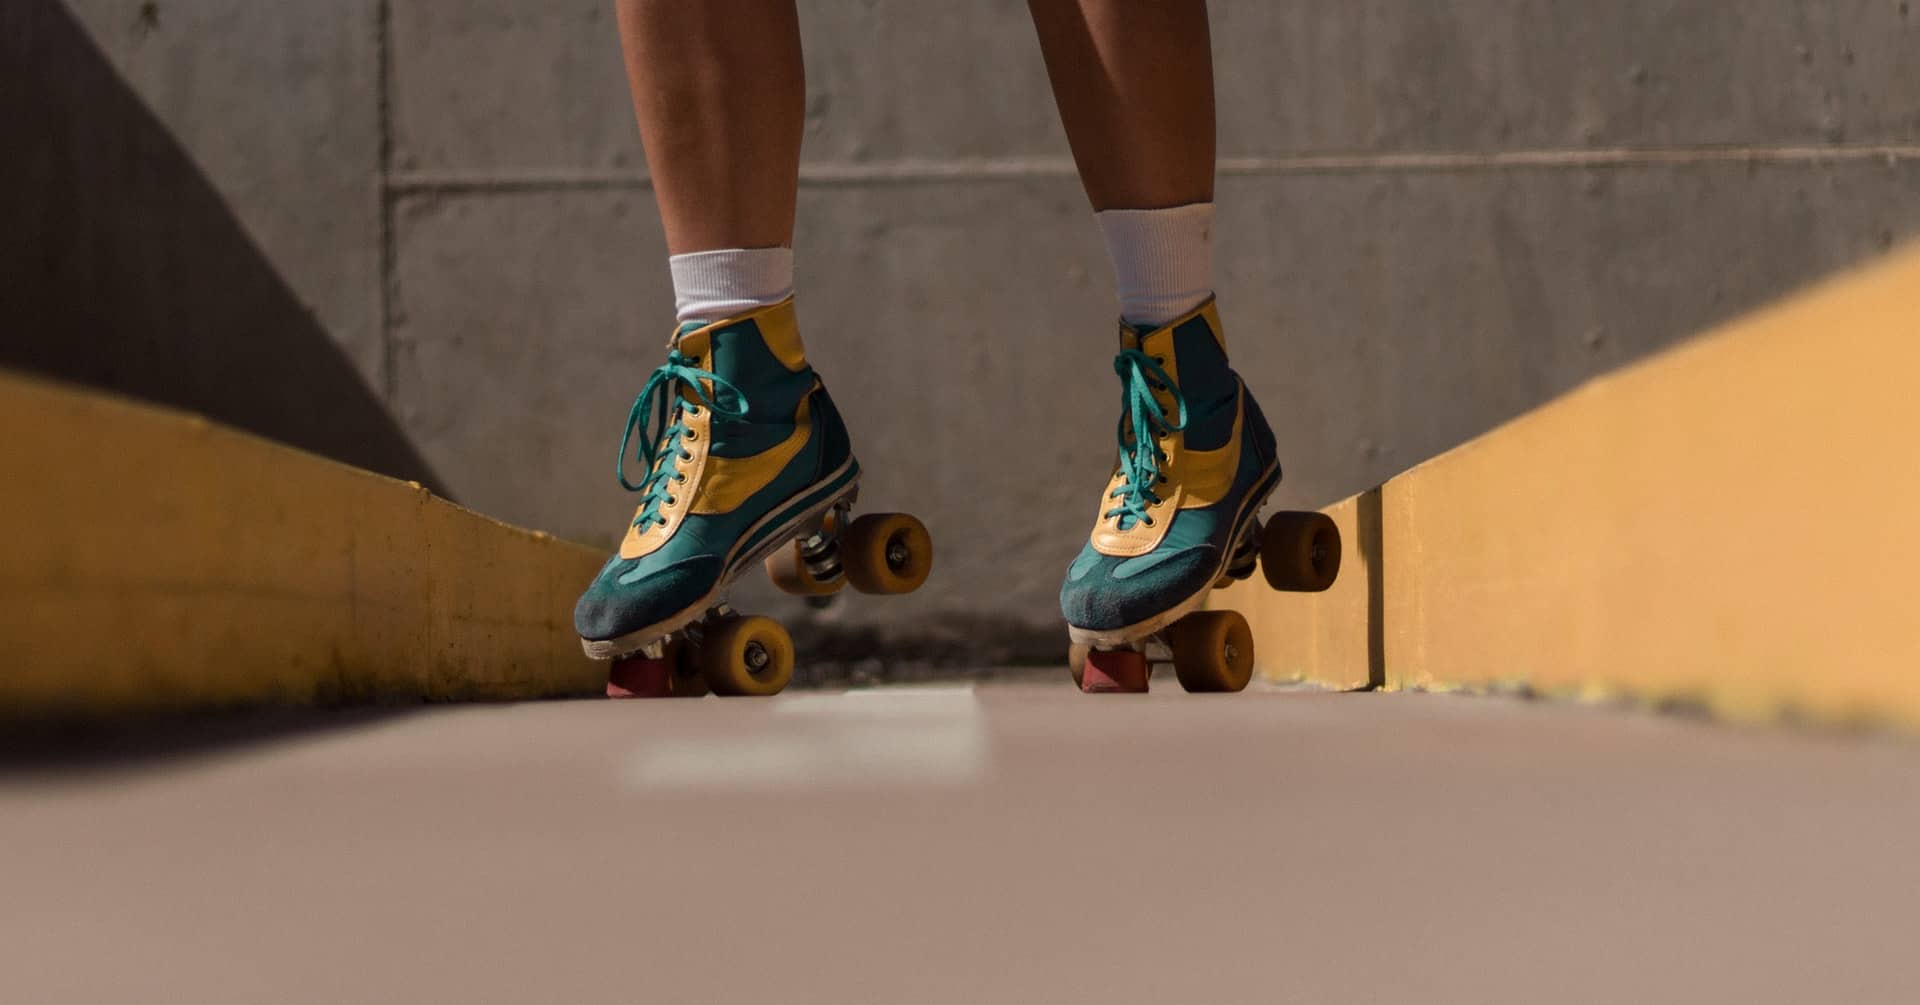 Roller skating – how to learn?